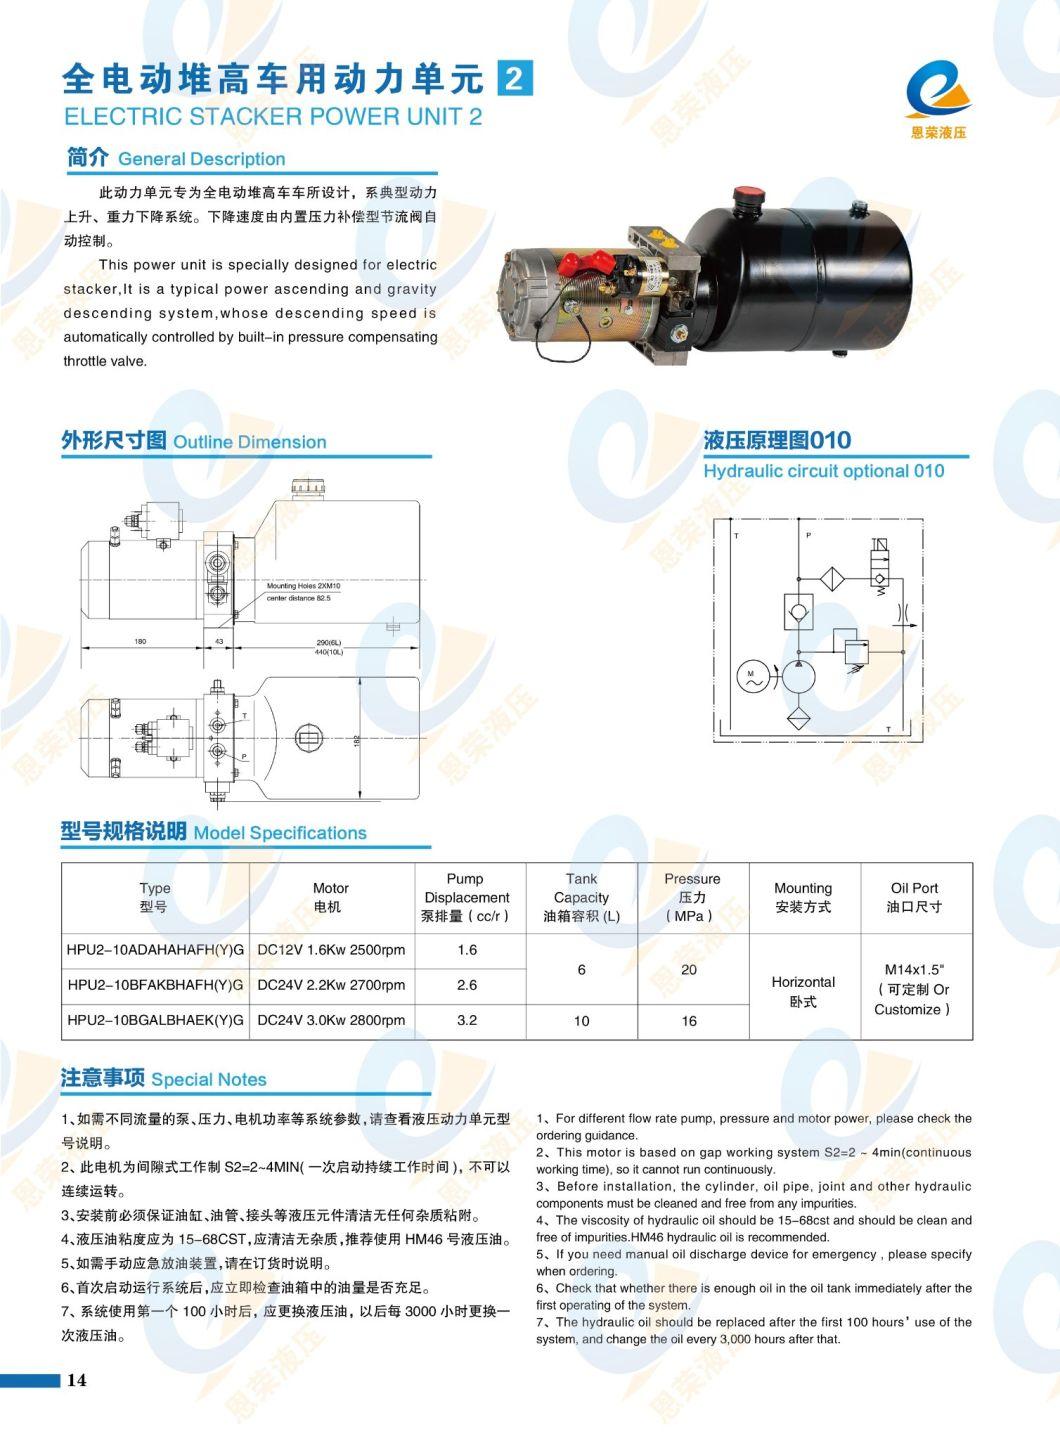 The Hydraulic Power Device of Electric Stacker Has Good Performance and High Power